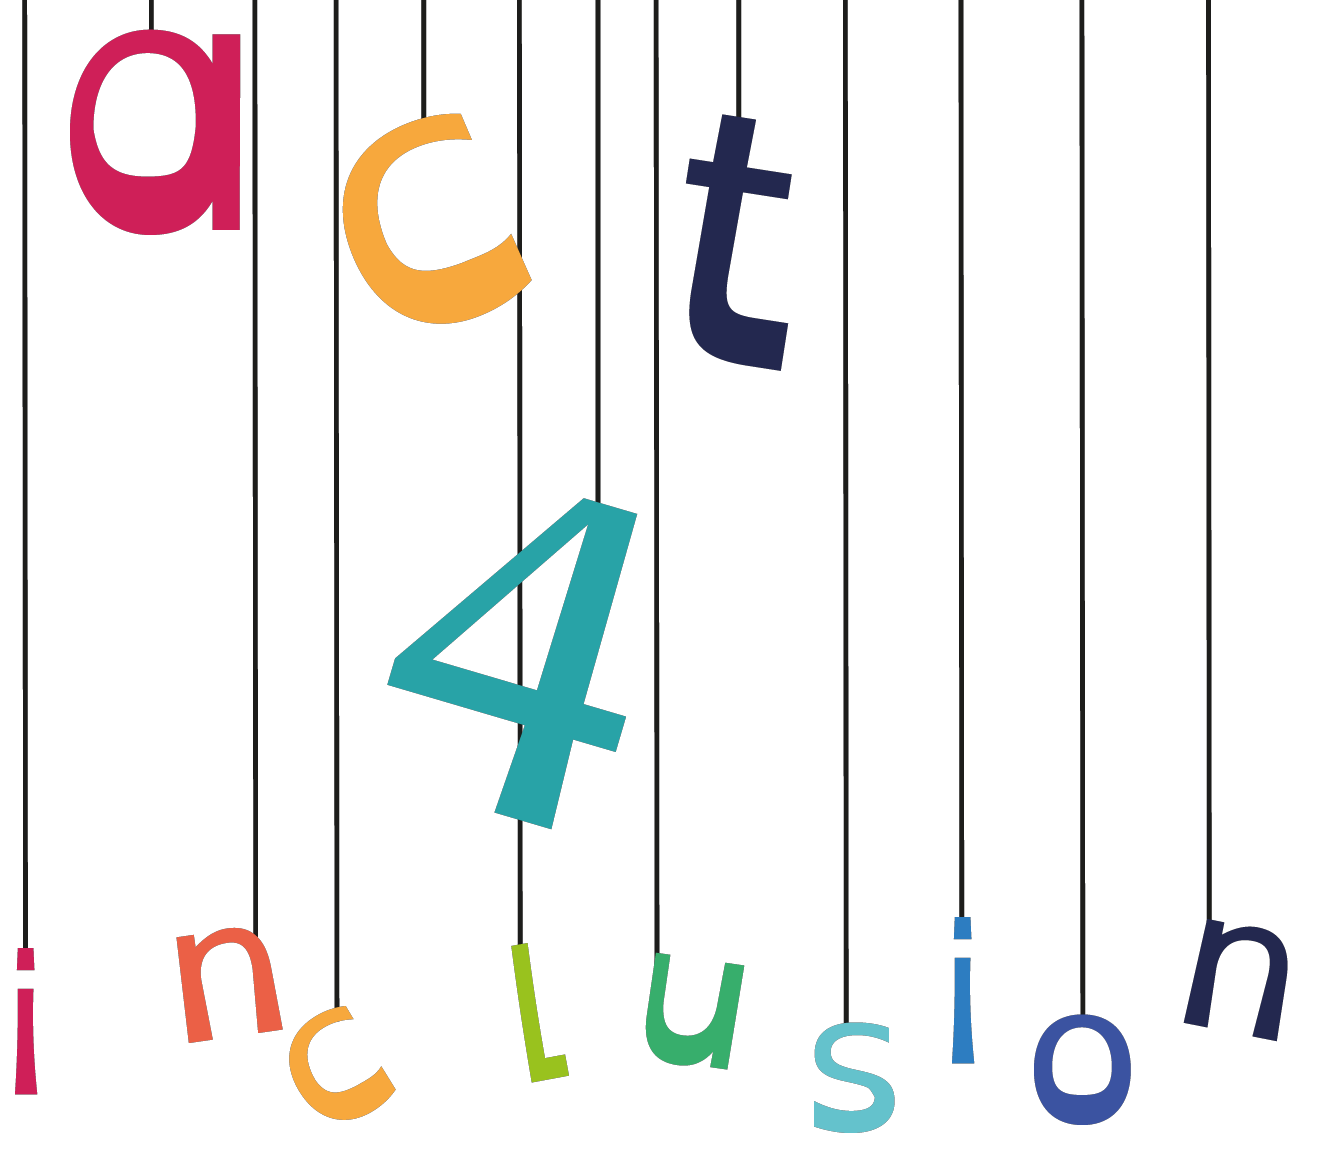 Act4INCLUSION